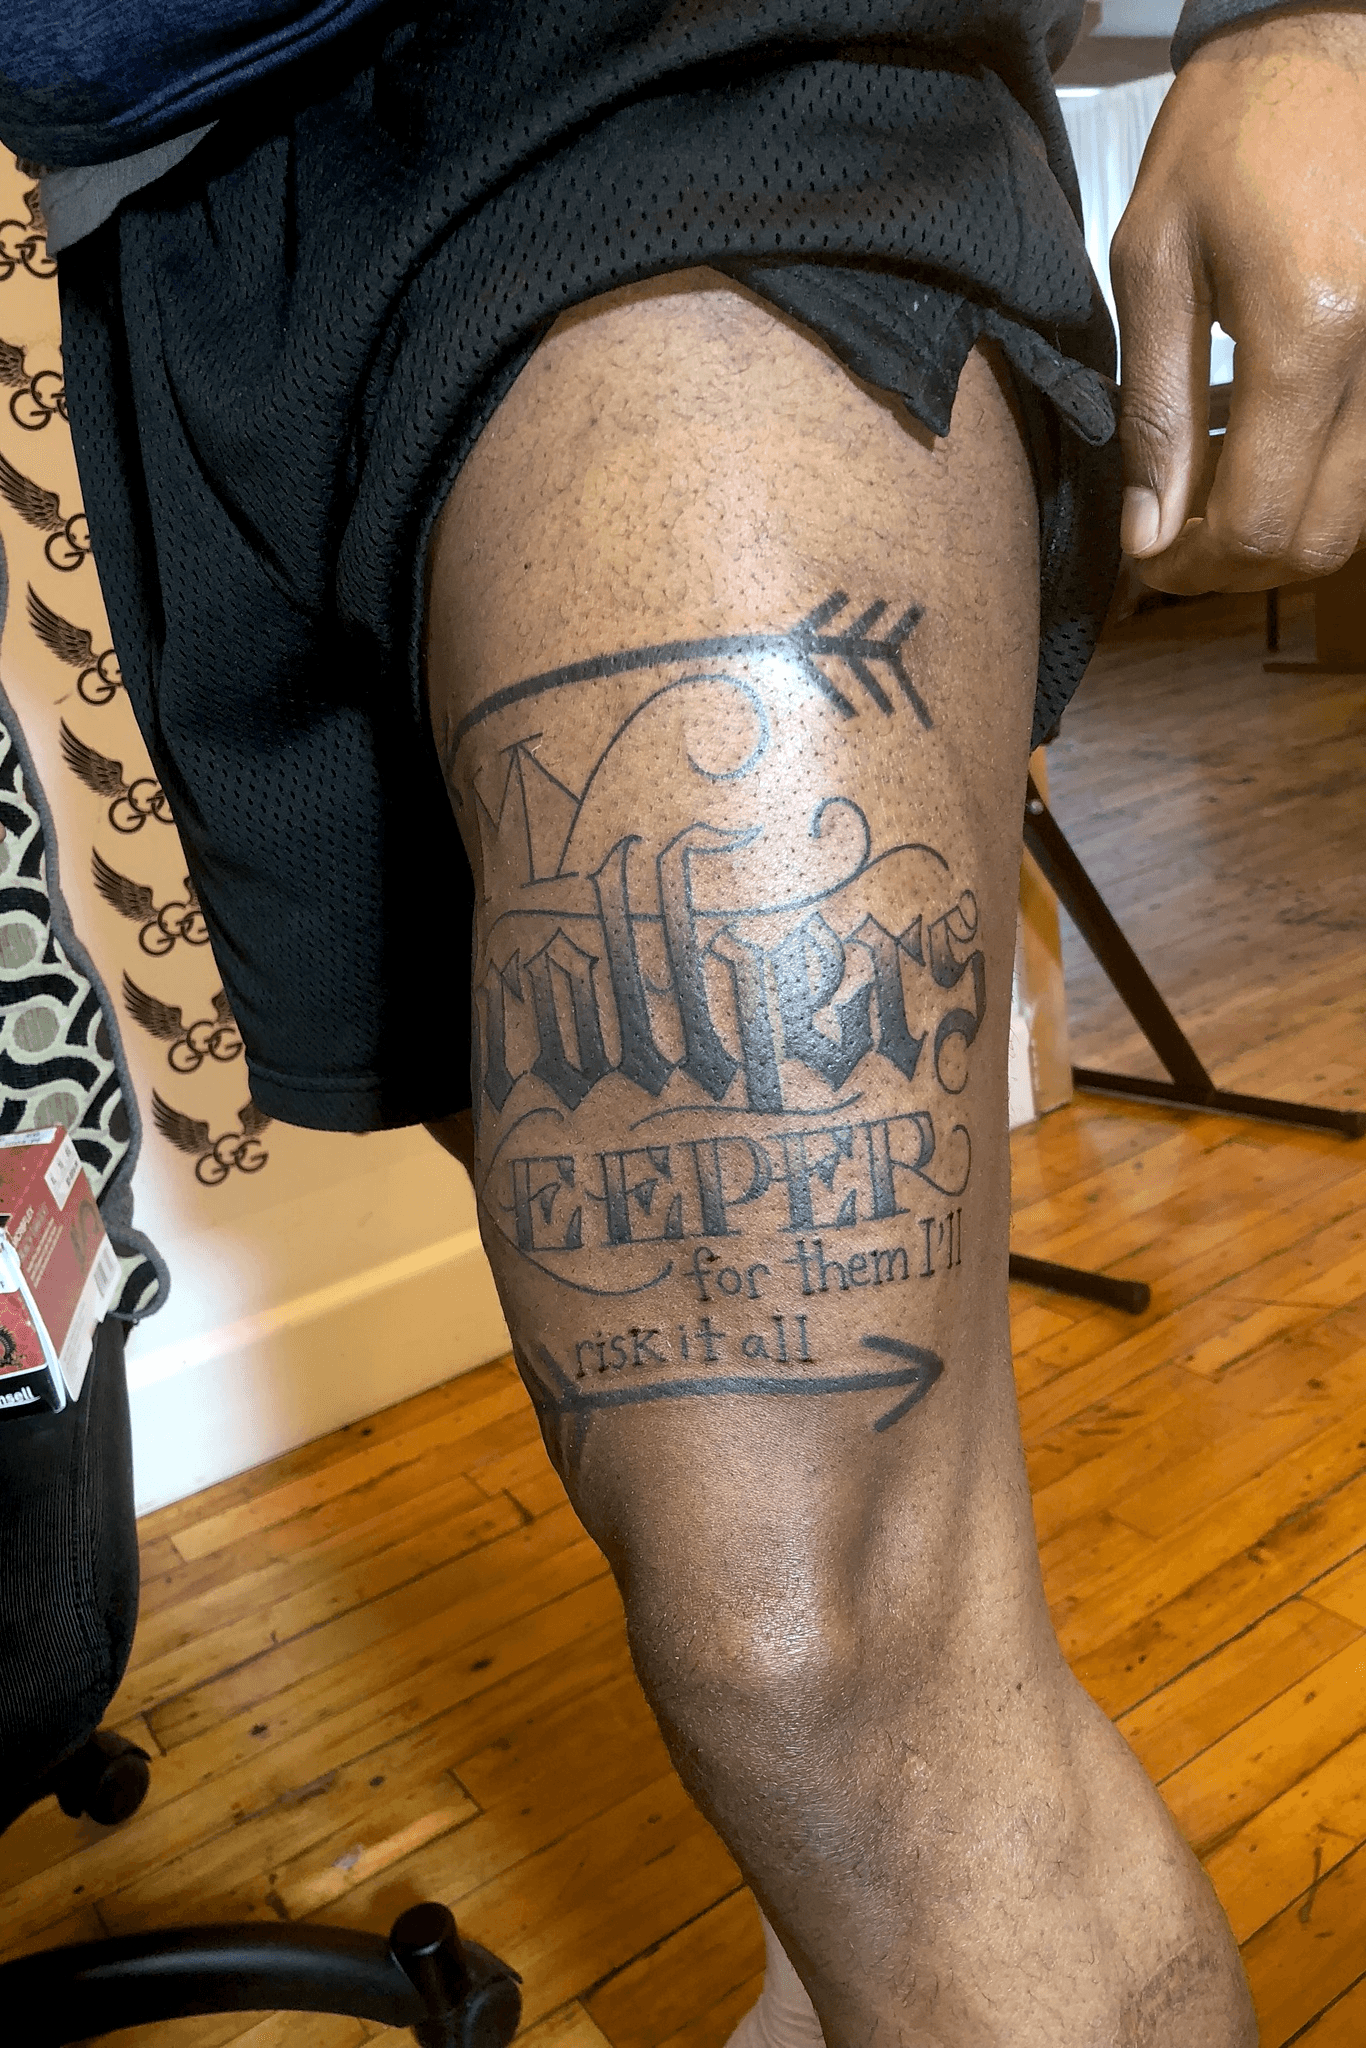 50 Best My Brothers Keeper Tattoos Ideas  Meanings  Tattoo Me Now